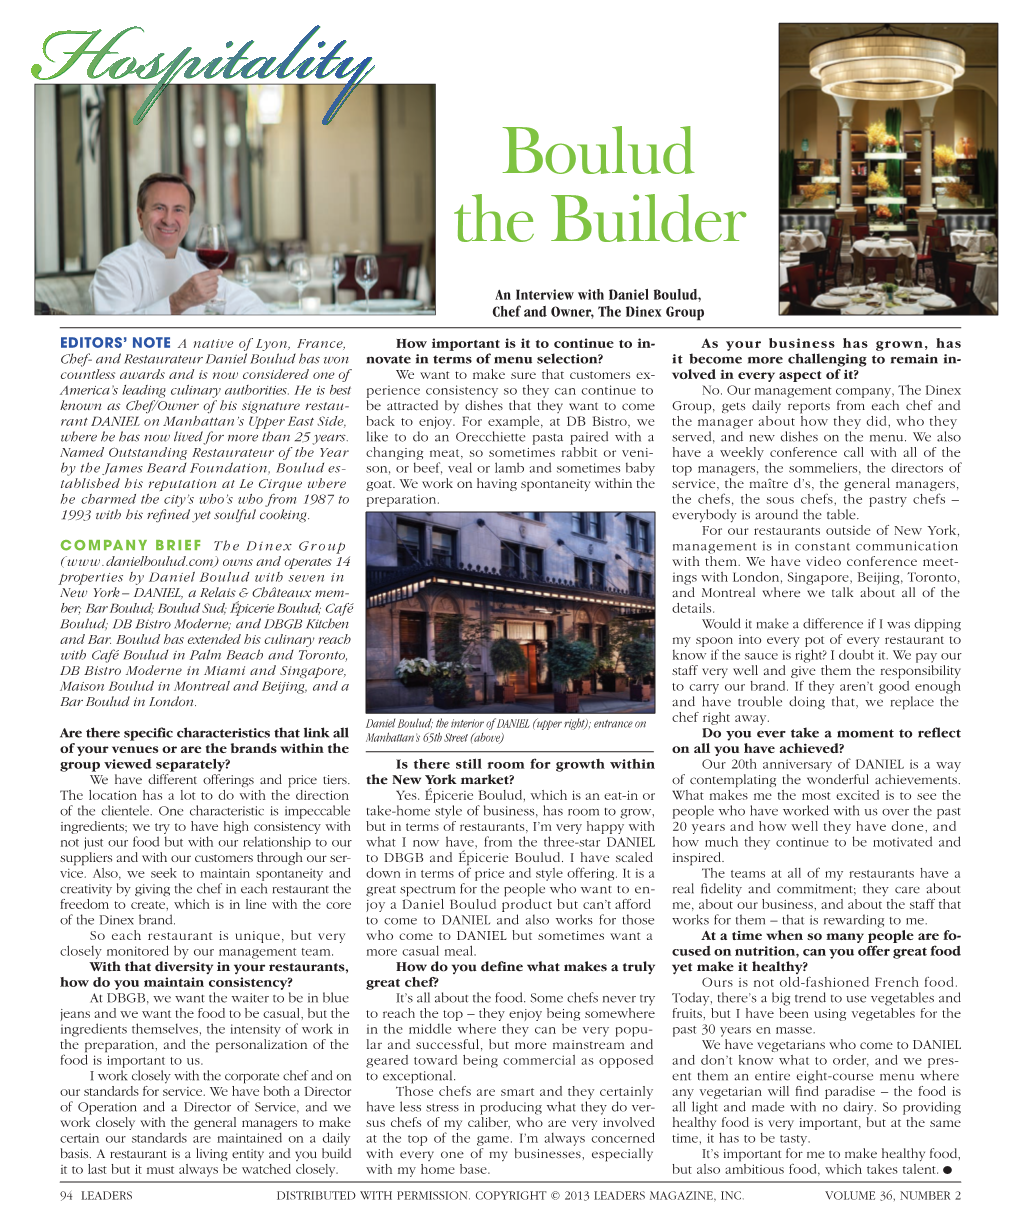 To Download a PDF of an Interview with Daniel Boulud, Chef And